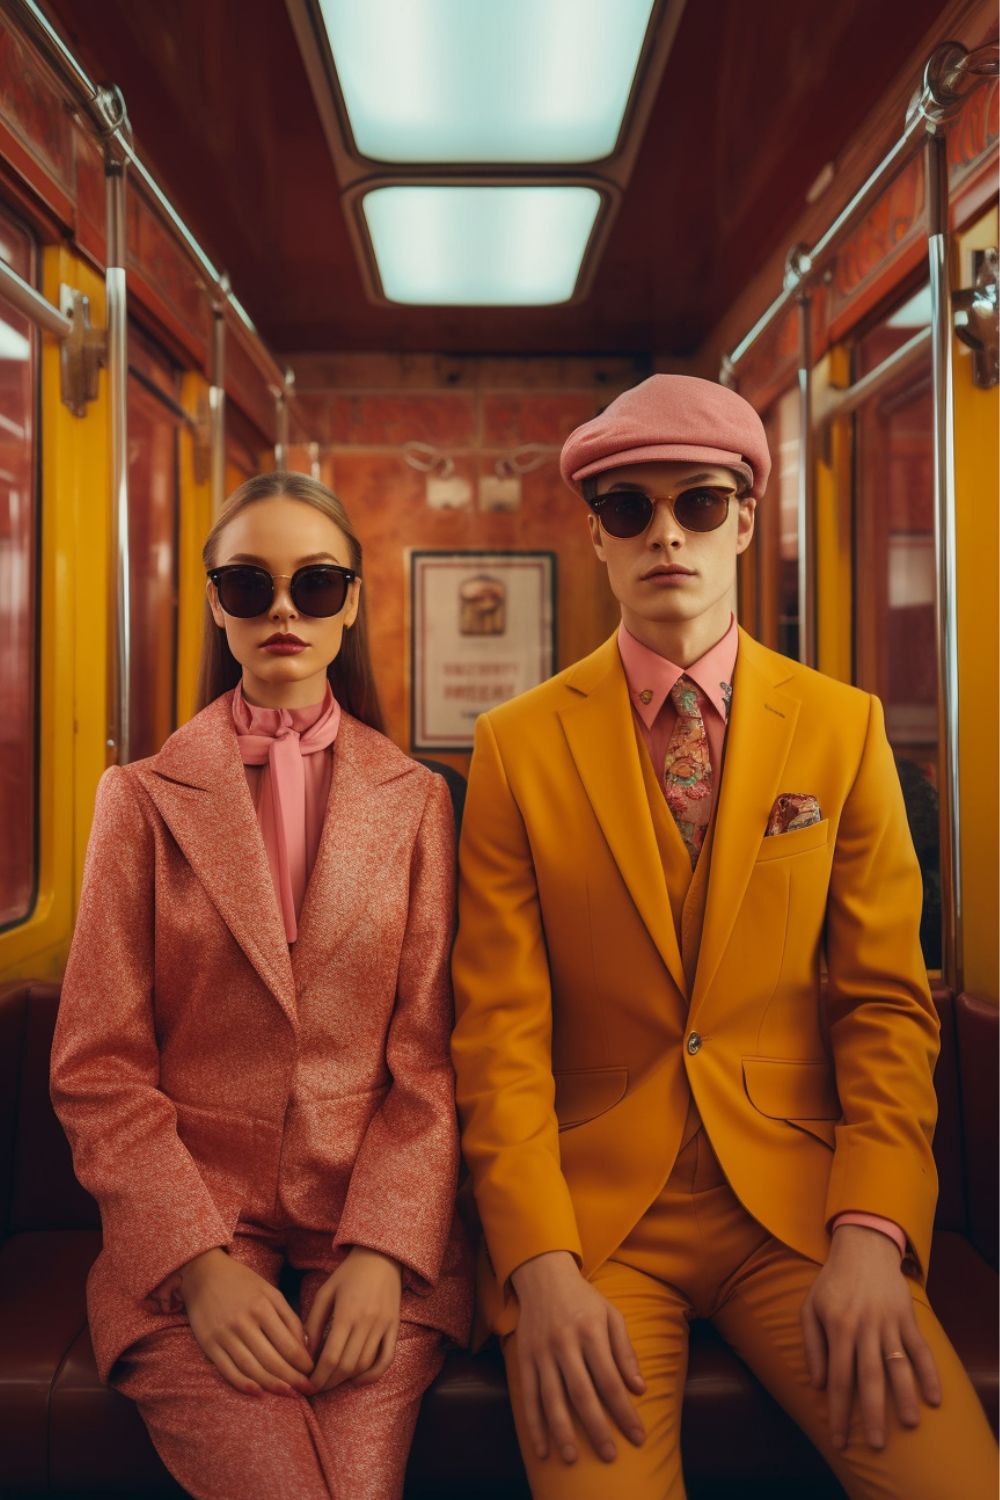 Wes Anderson Midjourney Prompts - How to Create A Wes Anderson Aesthetic with Midjourney AI